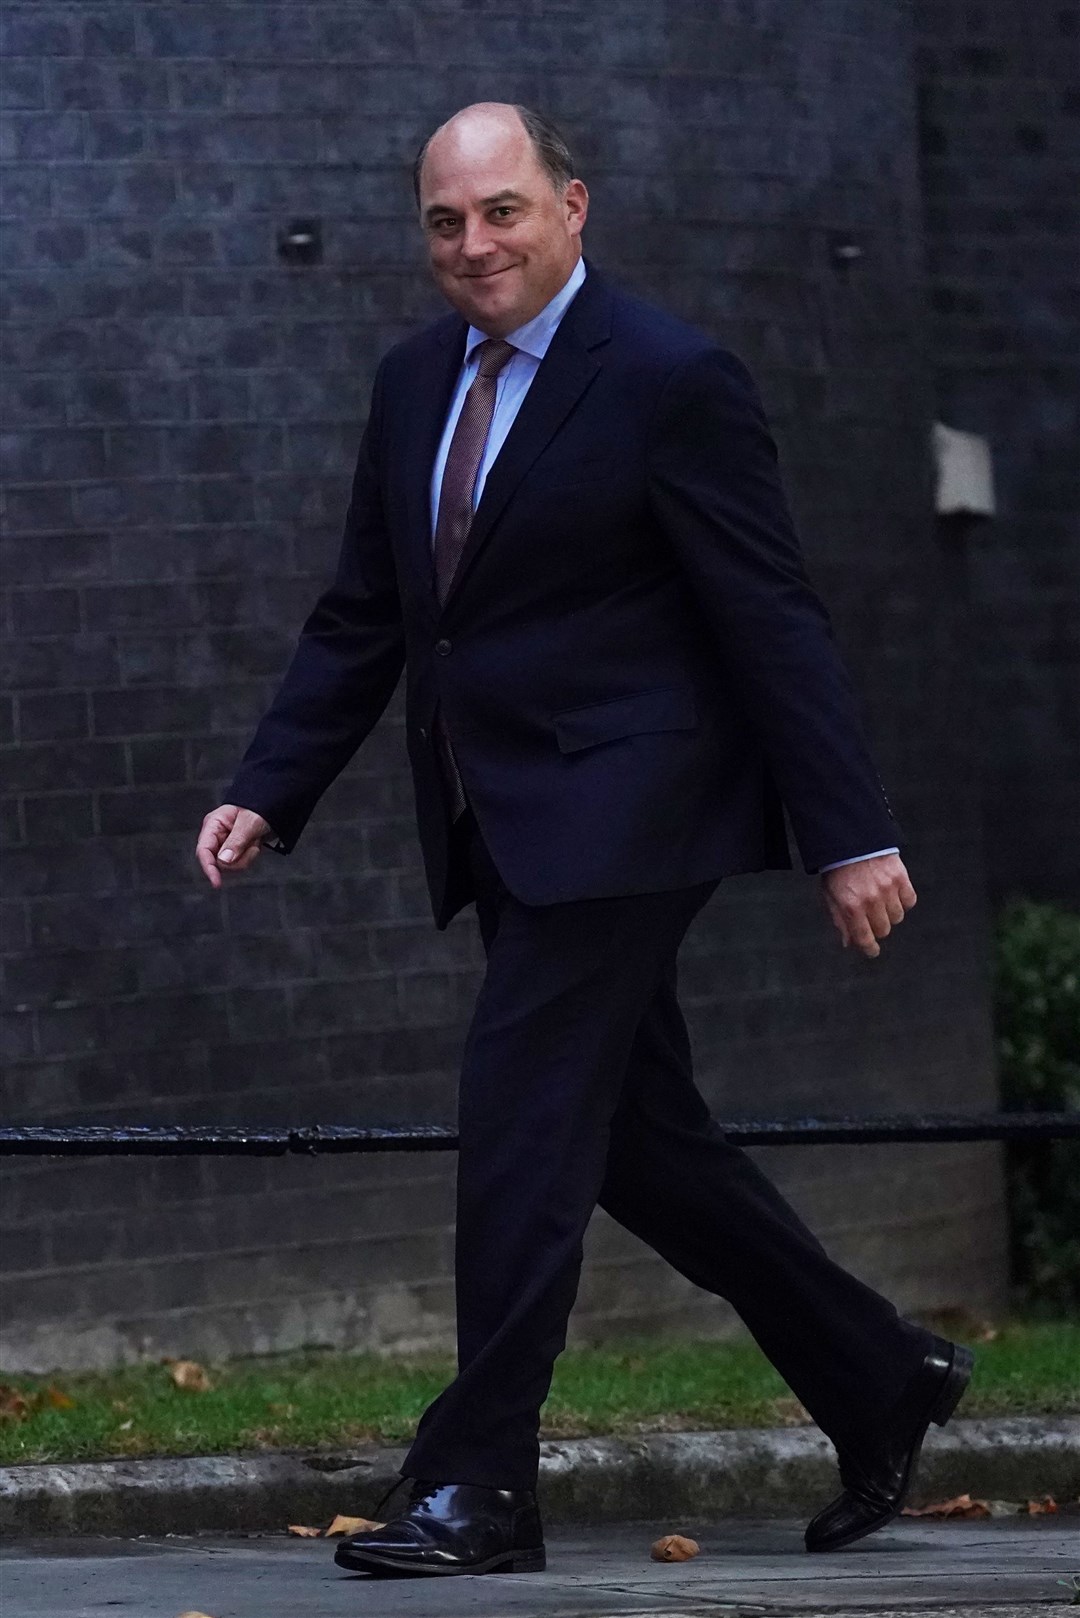 Defence Secretary Ben Wallace arriving for a meeting with Prime Minister Liz Truss at Downing Street (Kirsty O’Connor/PA)